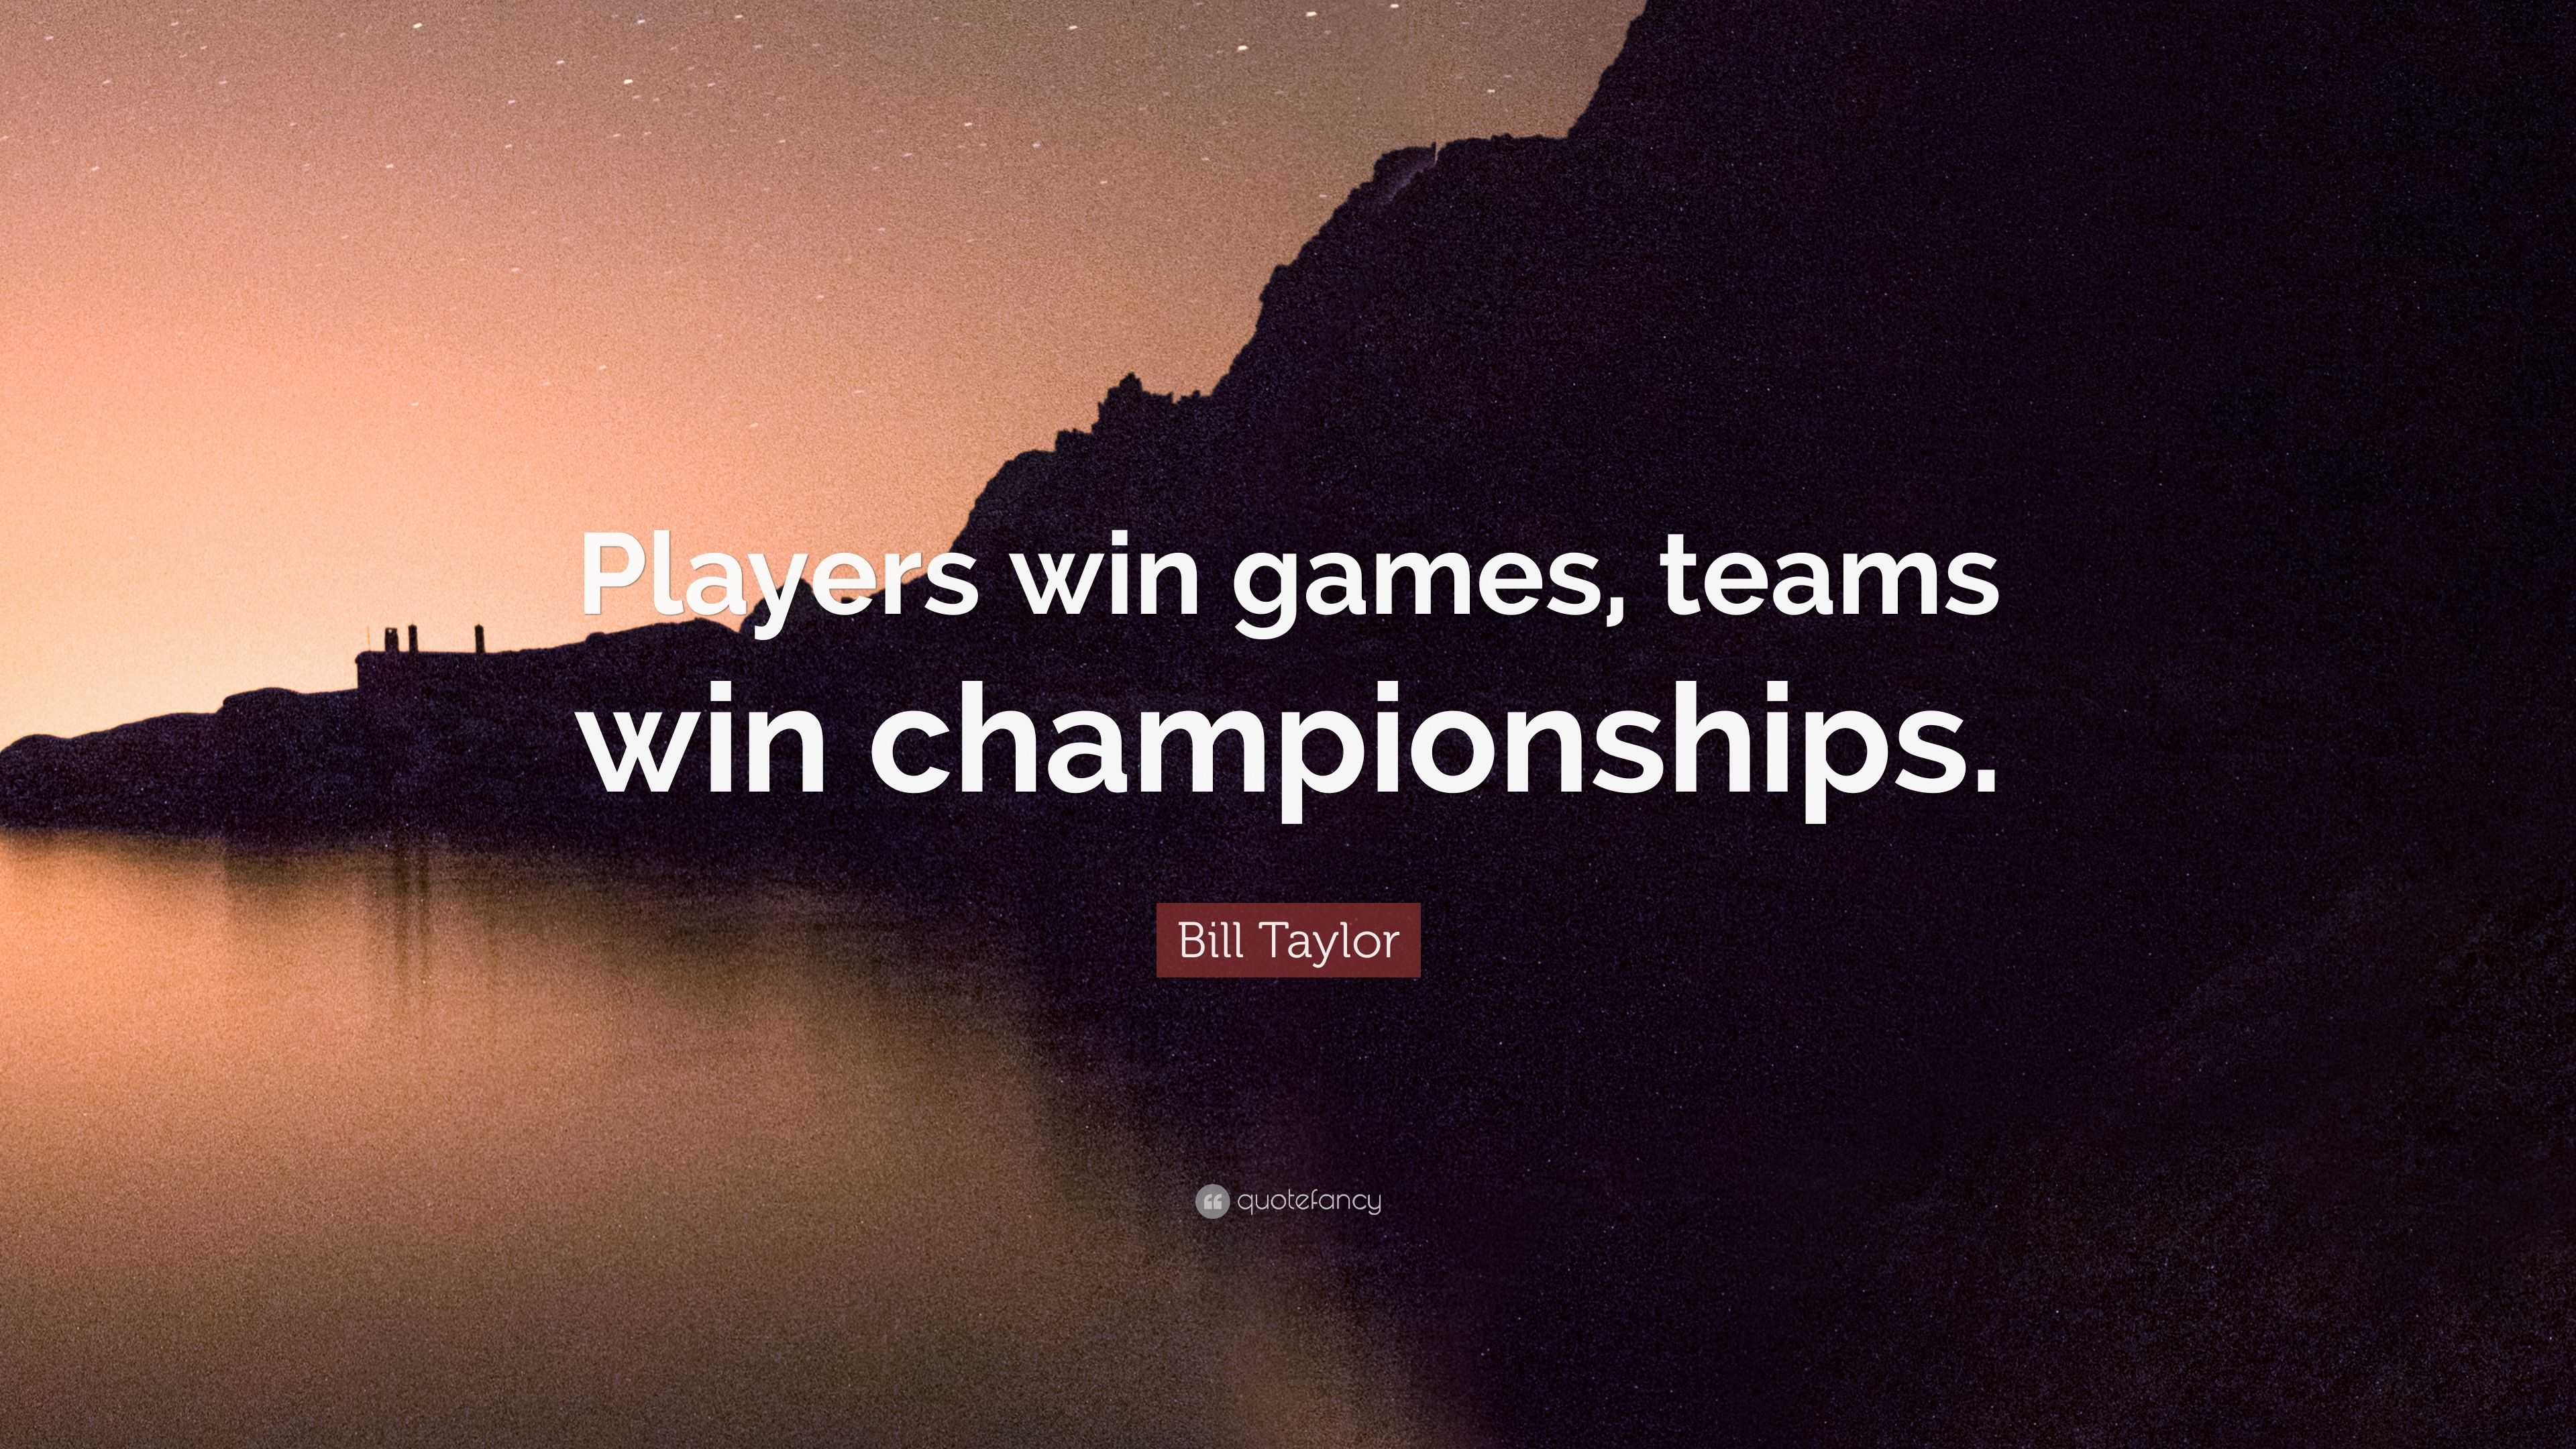 Bill Taylor Quote: “Players win games, teams win championships.”